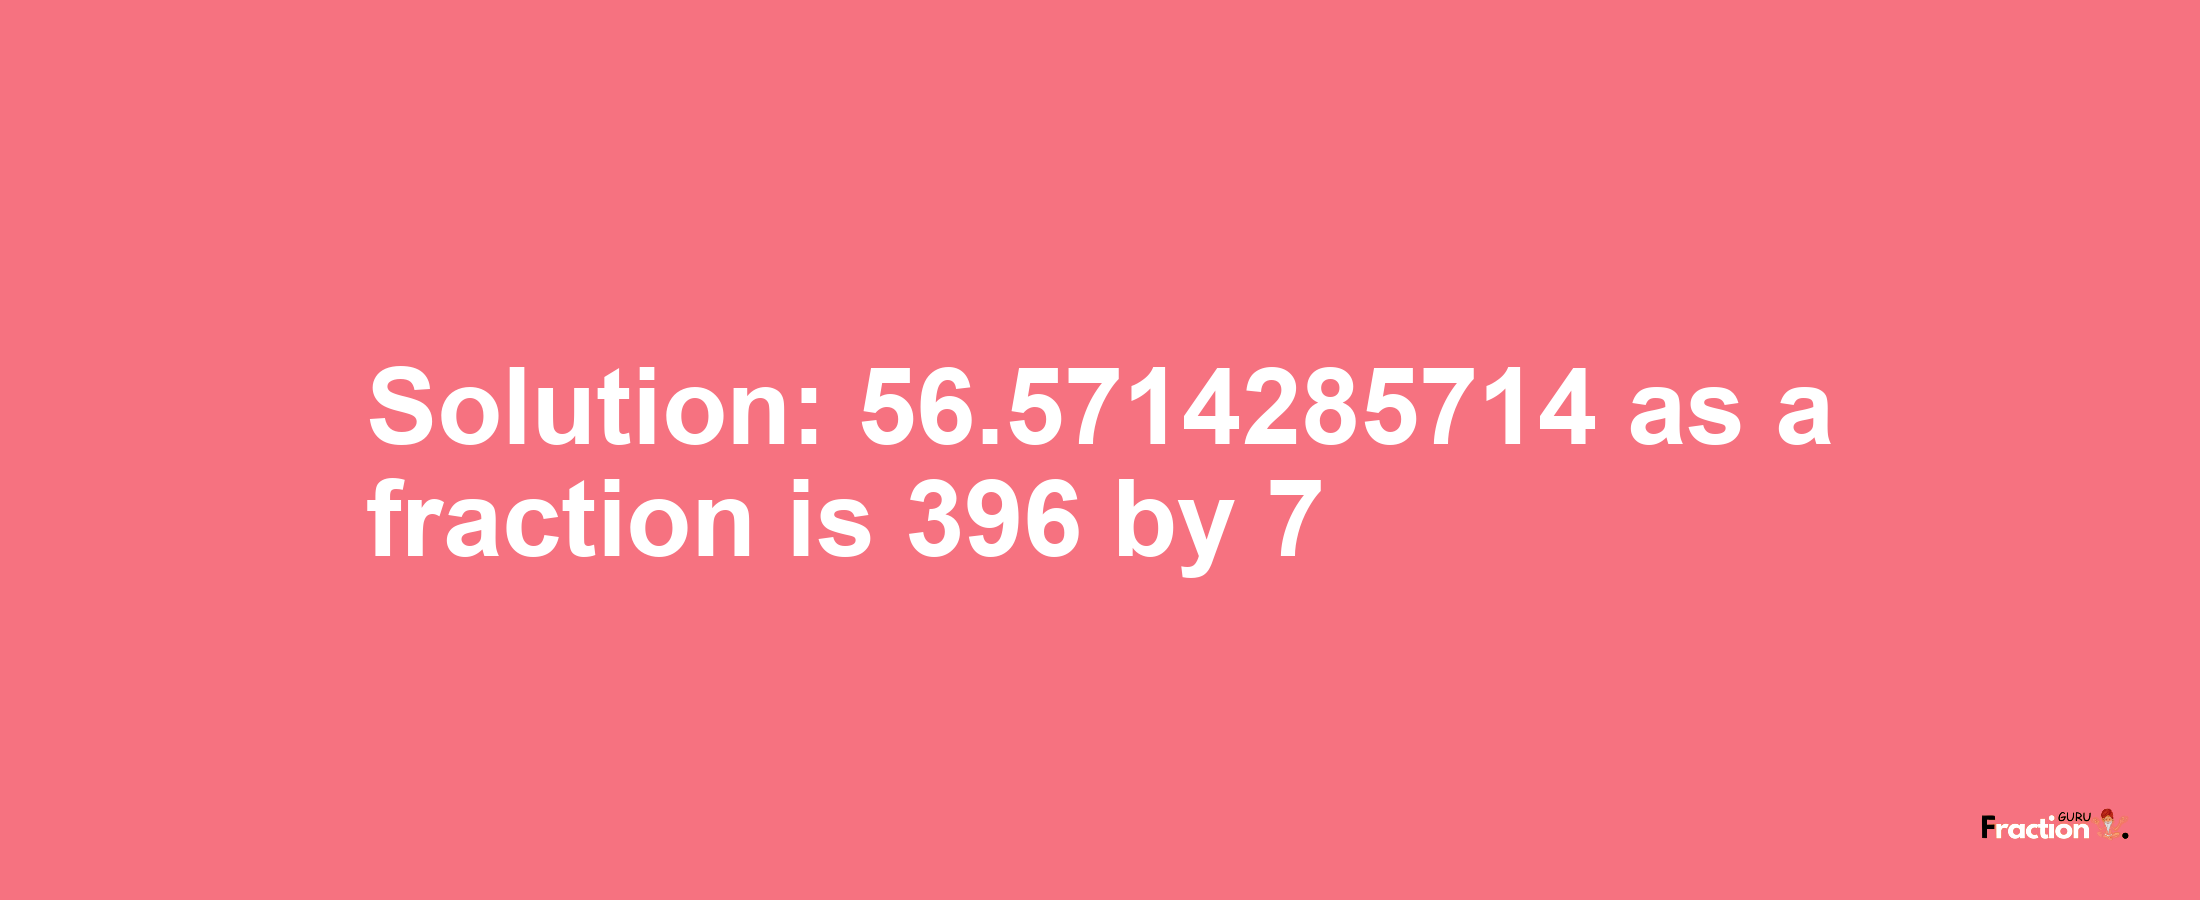 Solution:56.5714285714 as a fraction is 396/7